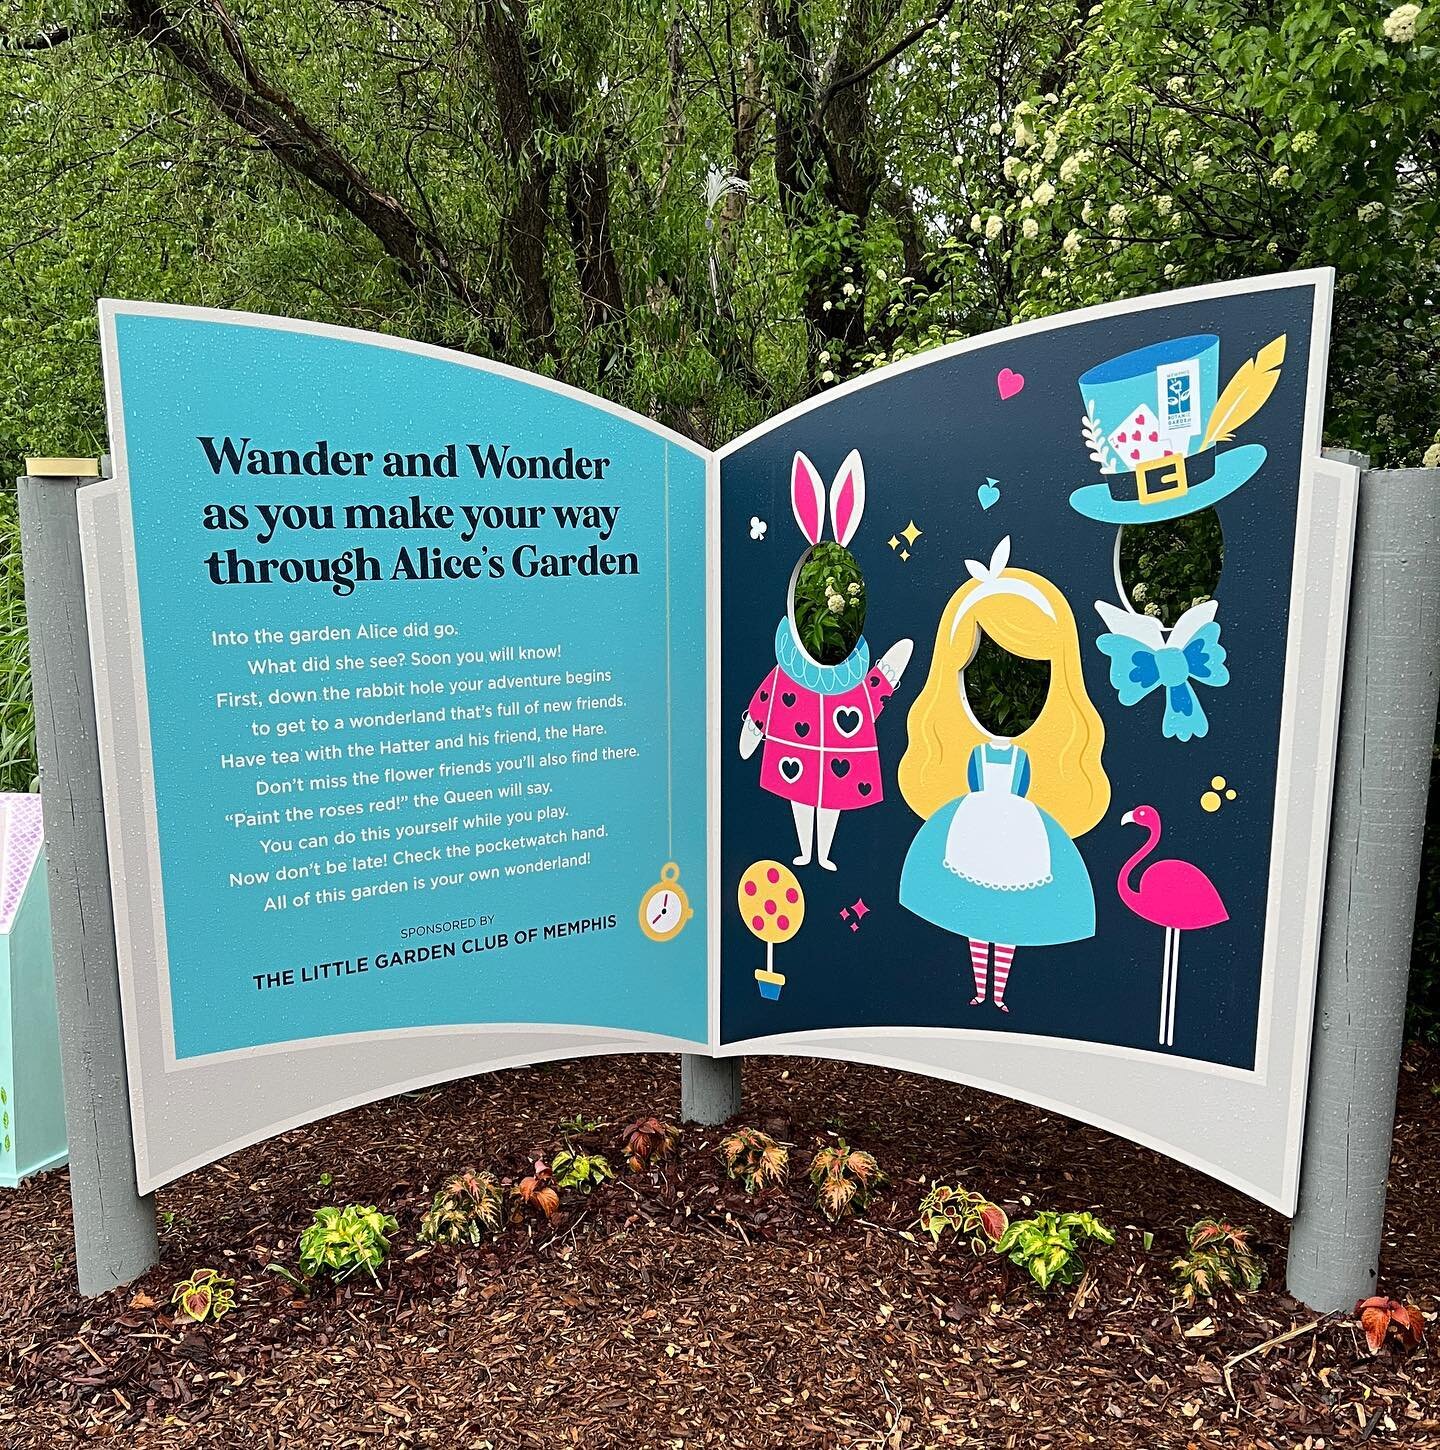 Little Garden Club is proud to sponsor the Idea Garden during the Alice&rsquo;s Adventures in the Garden exhibit at @memphisbotanic! Located in the Children&rsquo;s Garden, it is ready for little people to play and learn!
&hellip;..
#memphisbotanic #